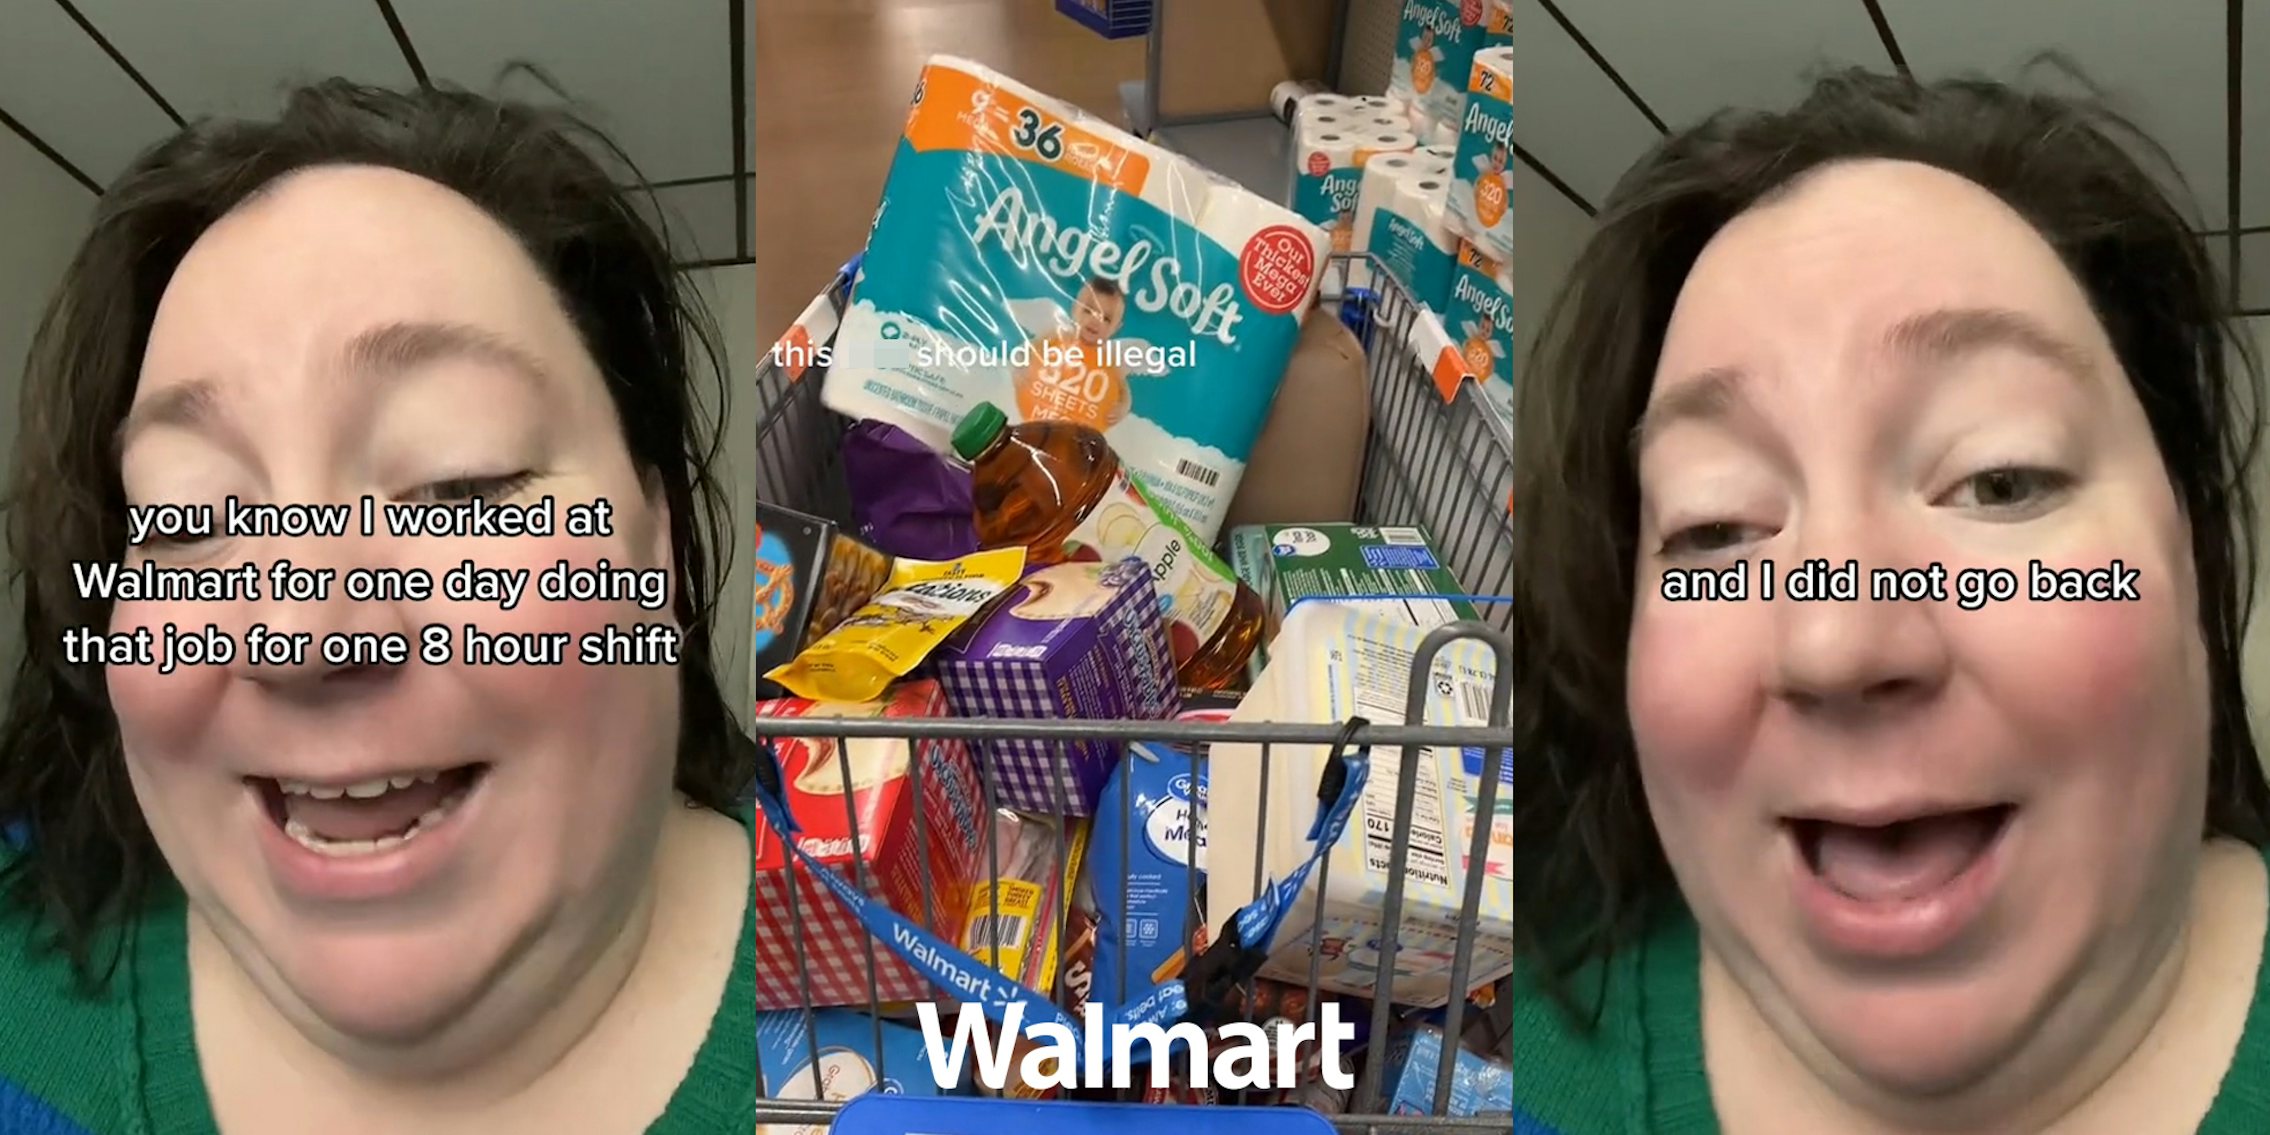 former Walmart employee speaking with caption 'you know I worked at Walmart for one day doing that job for one 8 hour shift' (l) Walmart online order picker with grocery cart full with caption 'this blank should be illegal' with Walmart logo at bottom (c) former Walmart employee speaking with caption 'and I did not go back' (r)